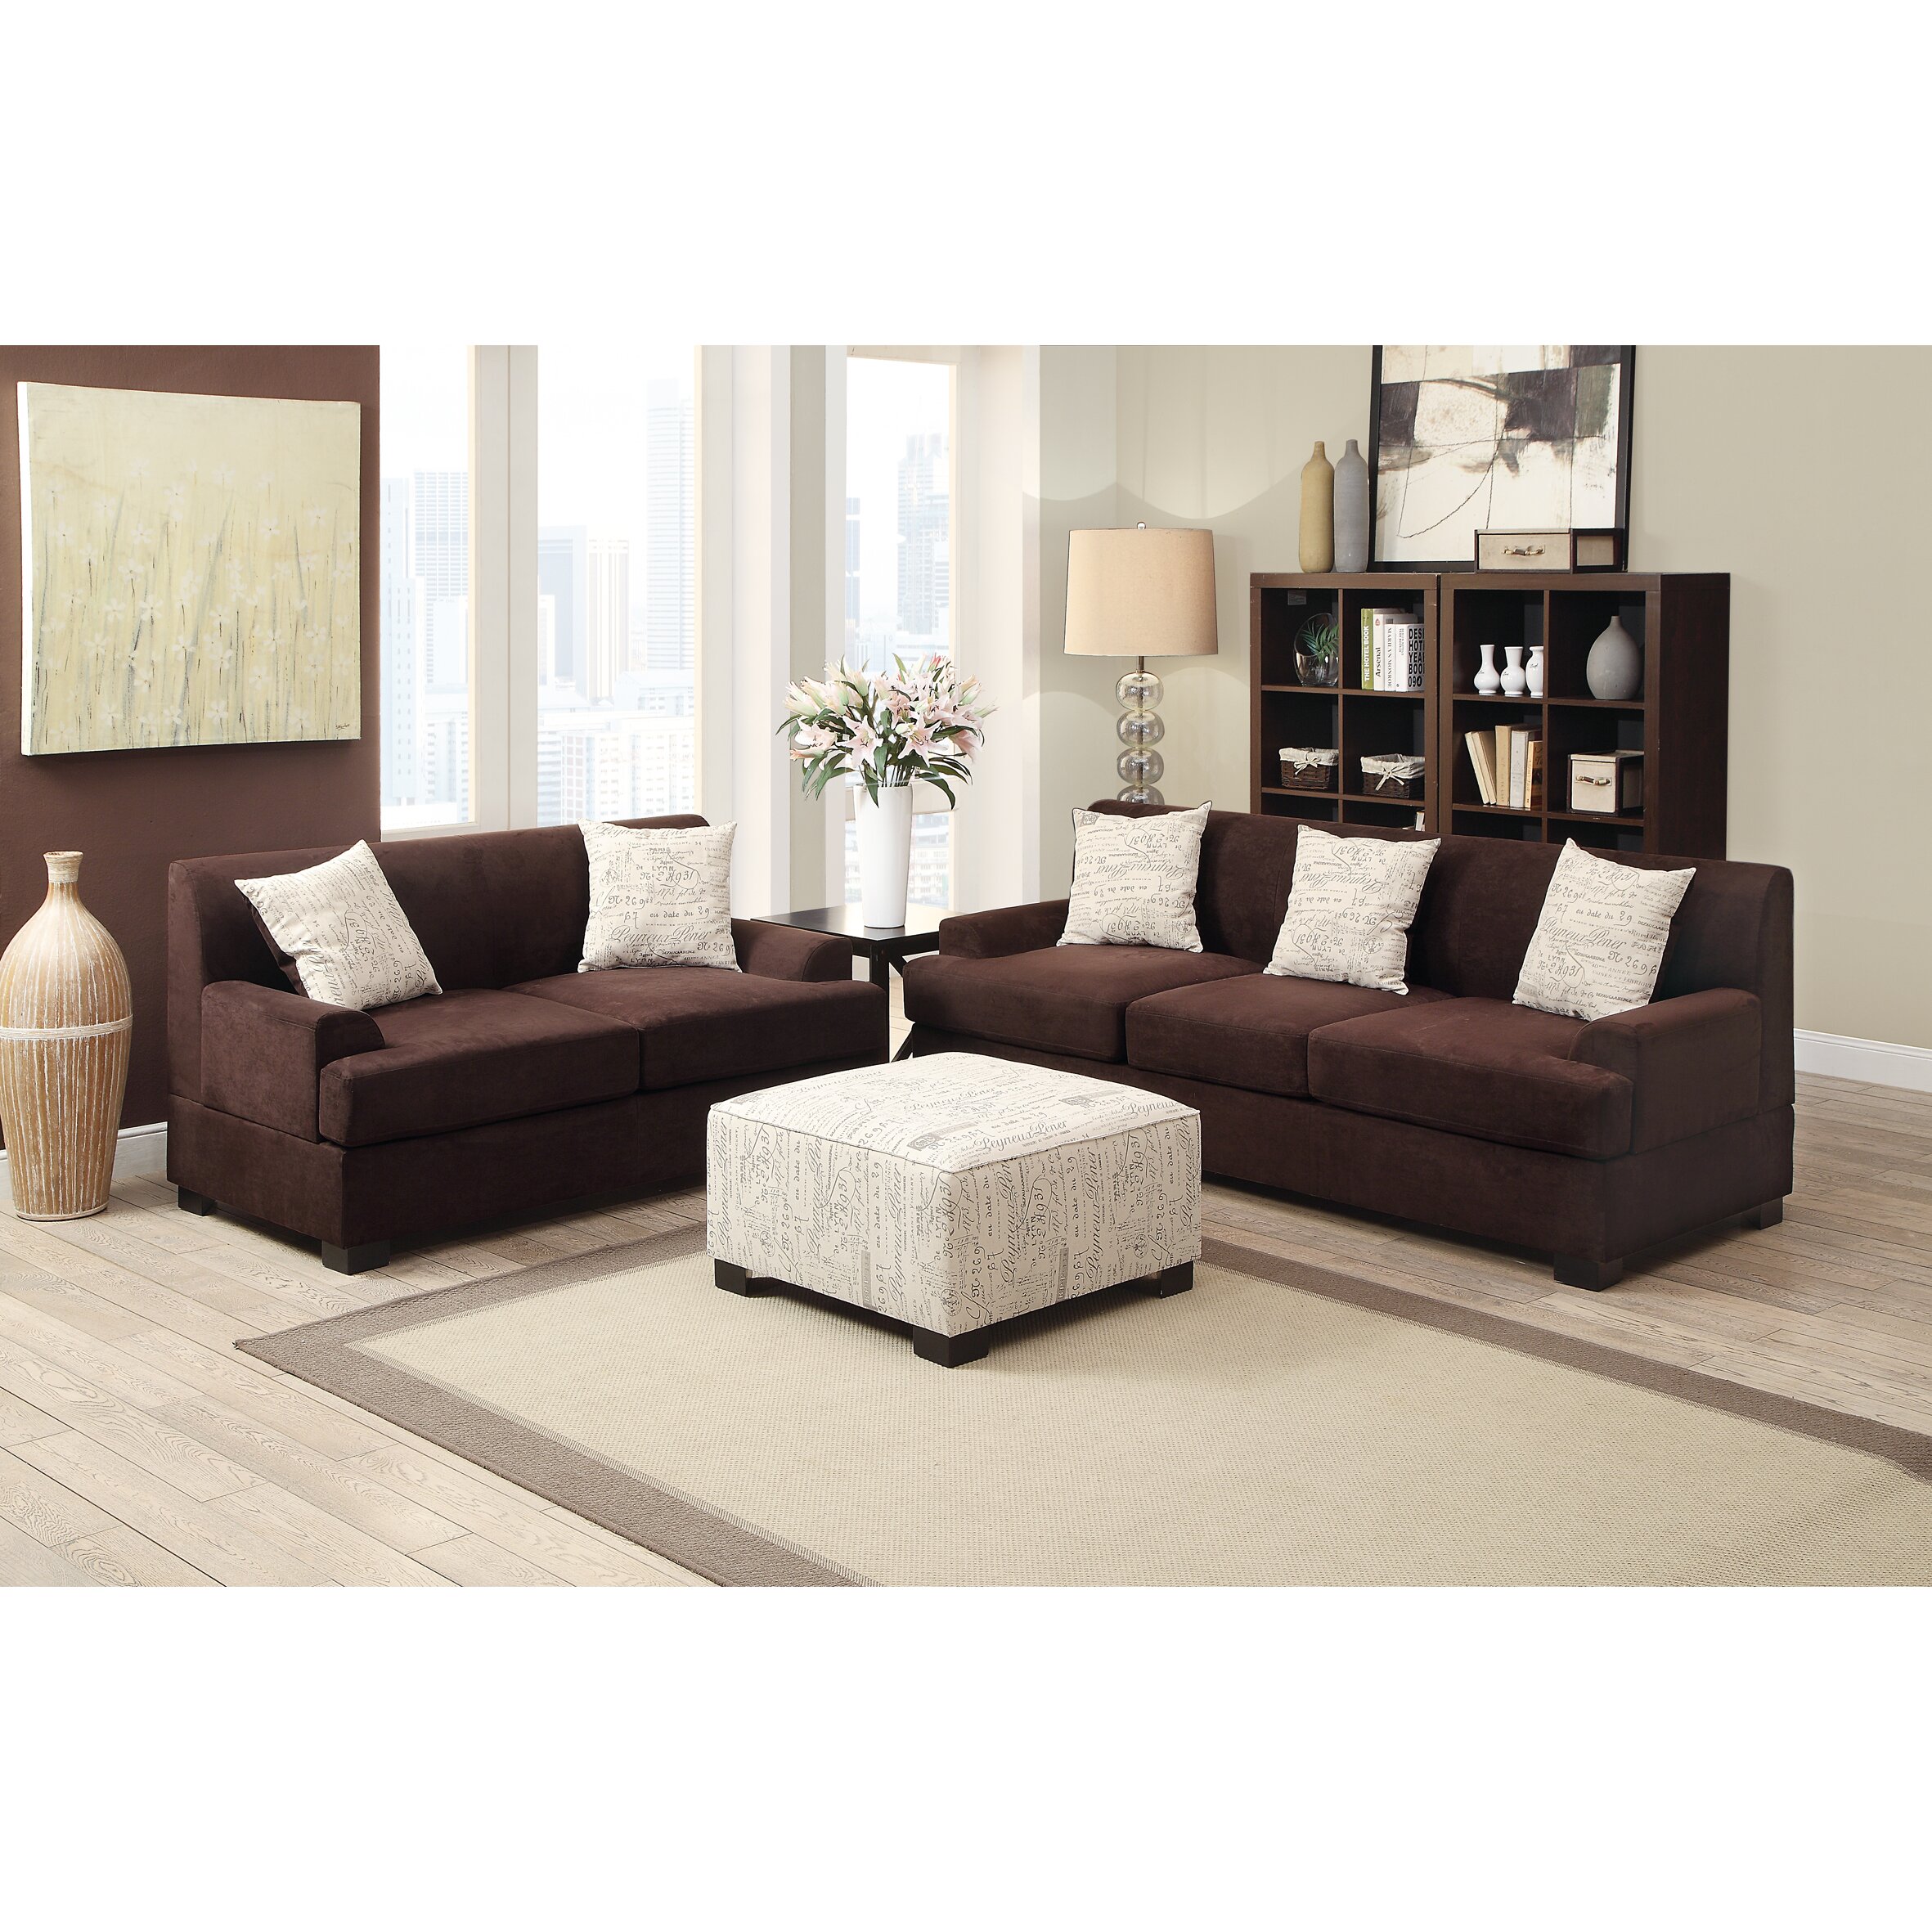 Poundex Bobkona Barrie Sofa and Loveseat Set & Reviews